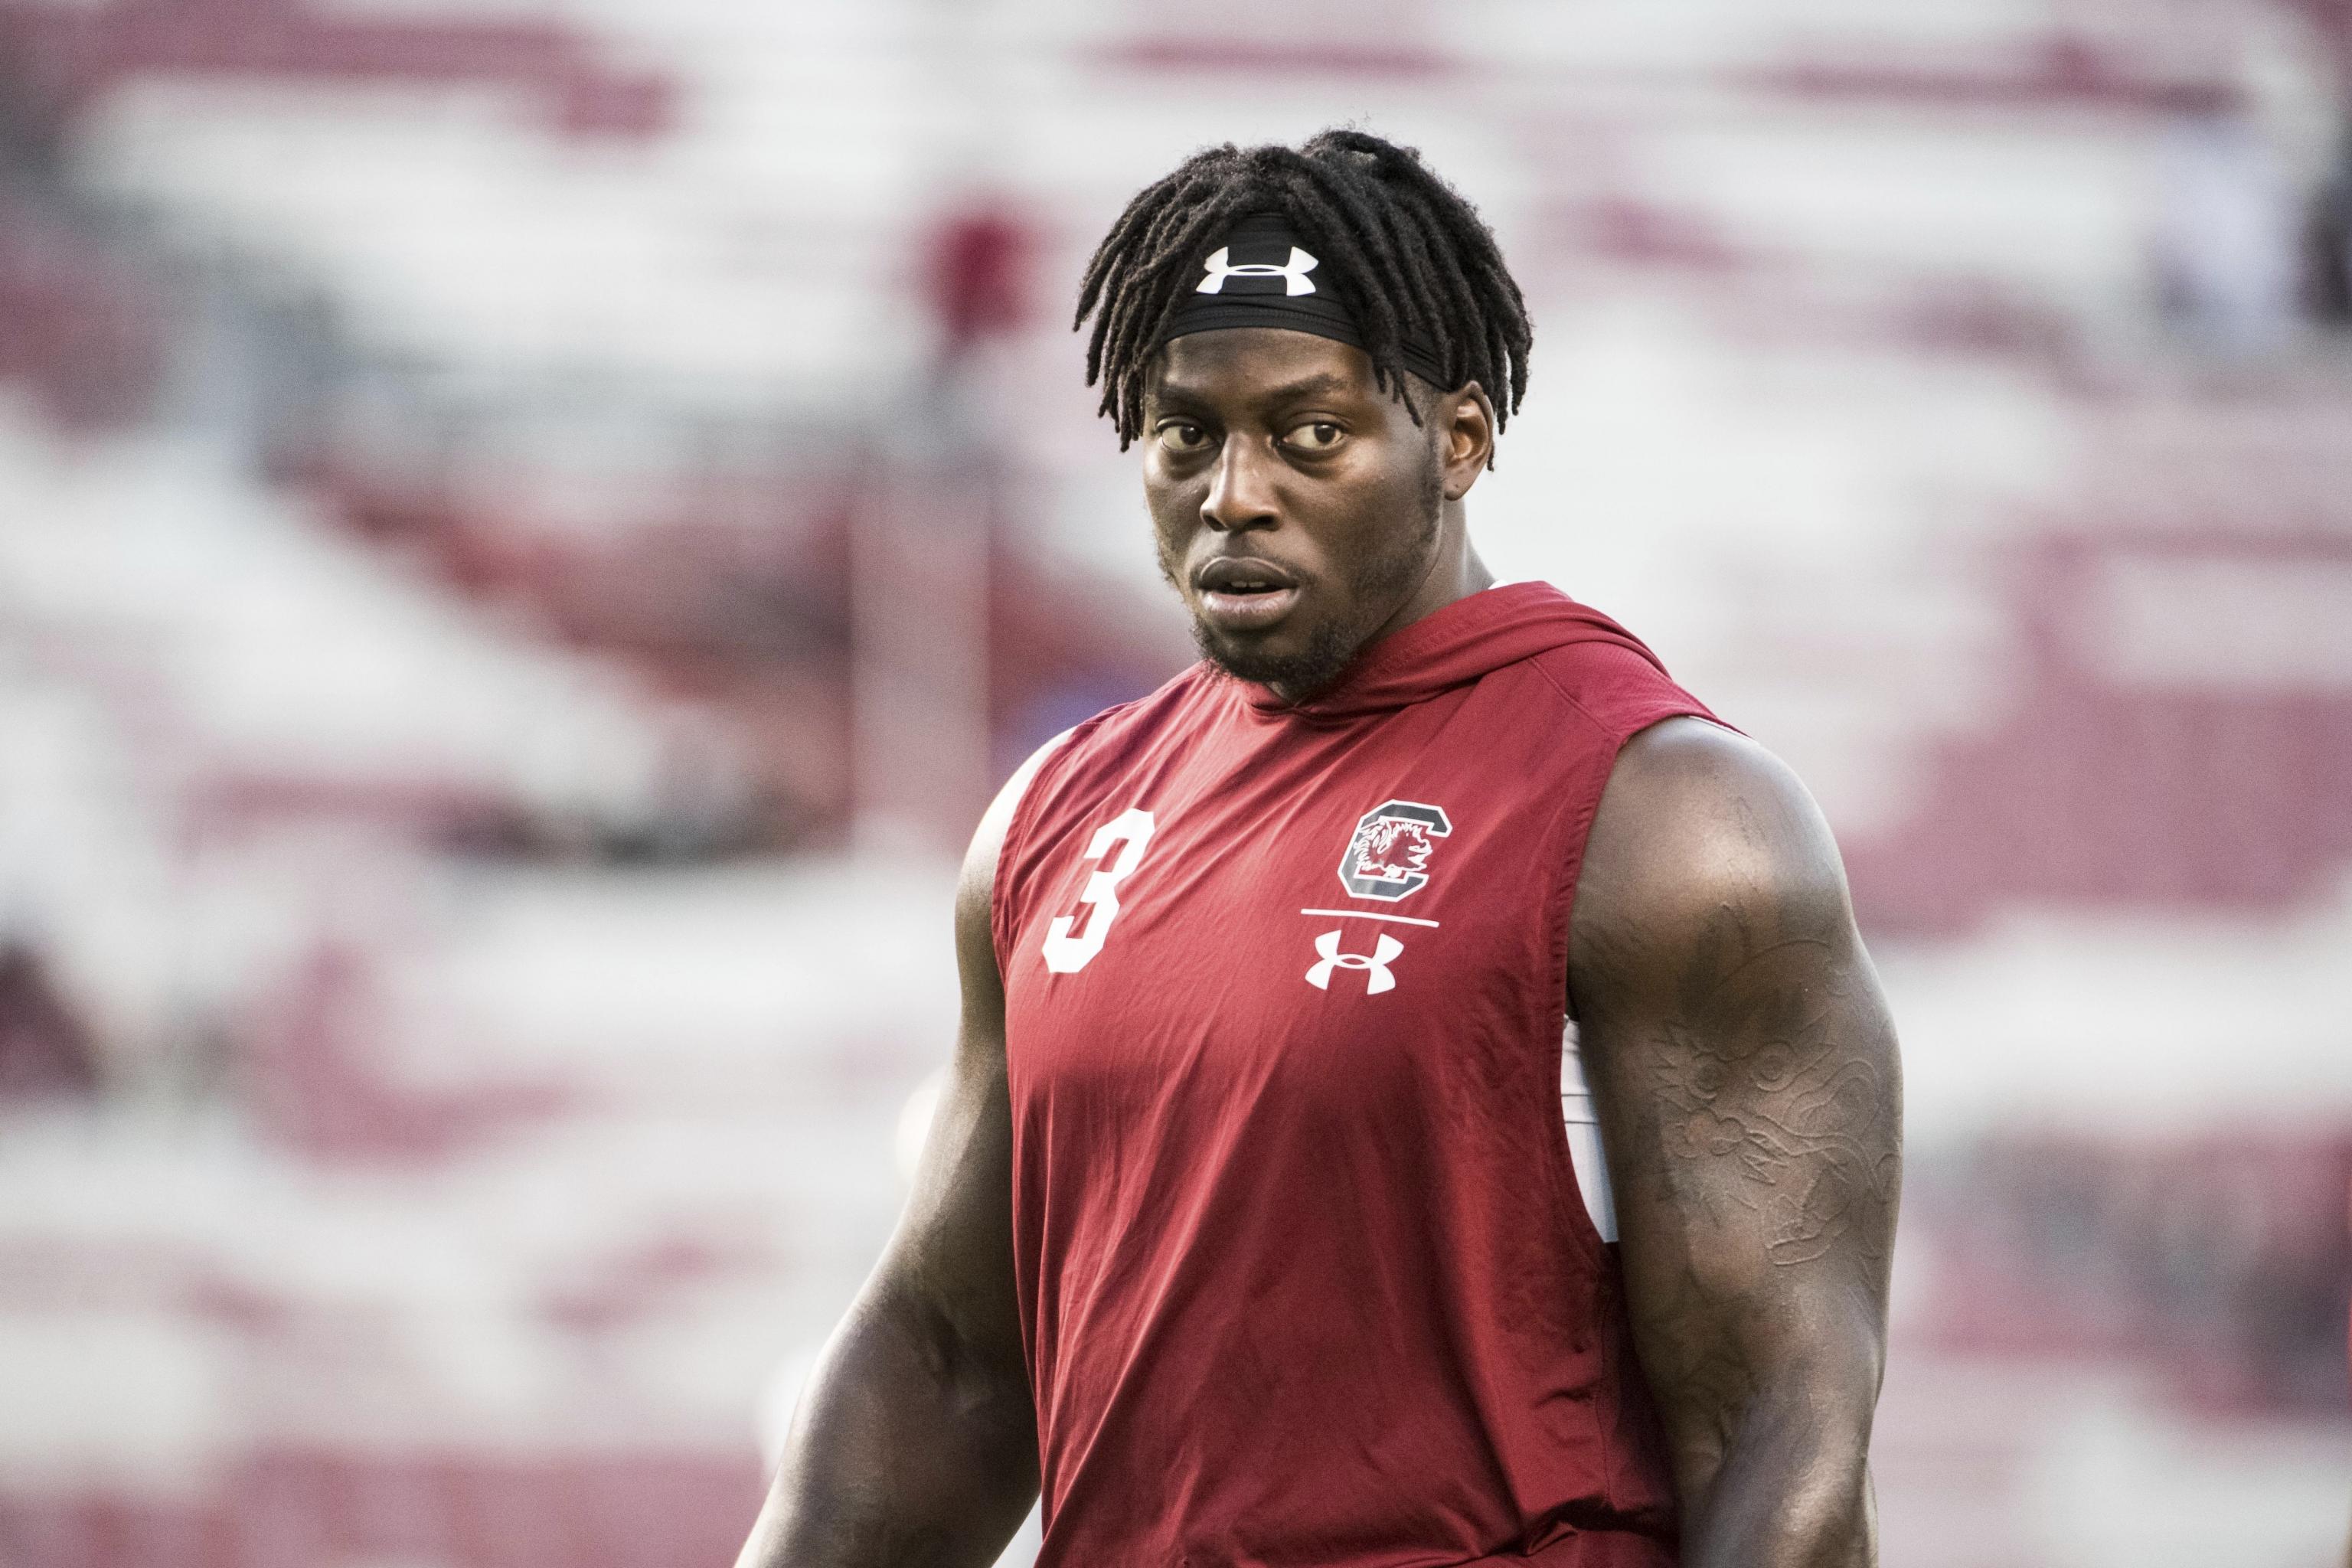 49ers select South Carolina's Javon Kinlaw 14th overall in NFL Draft